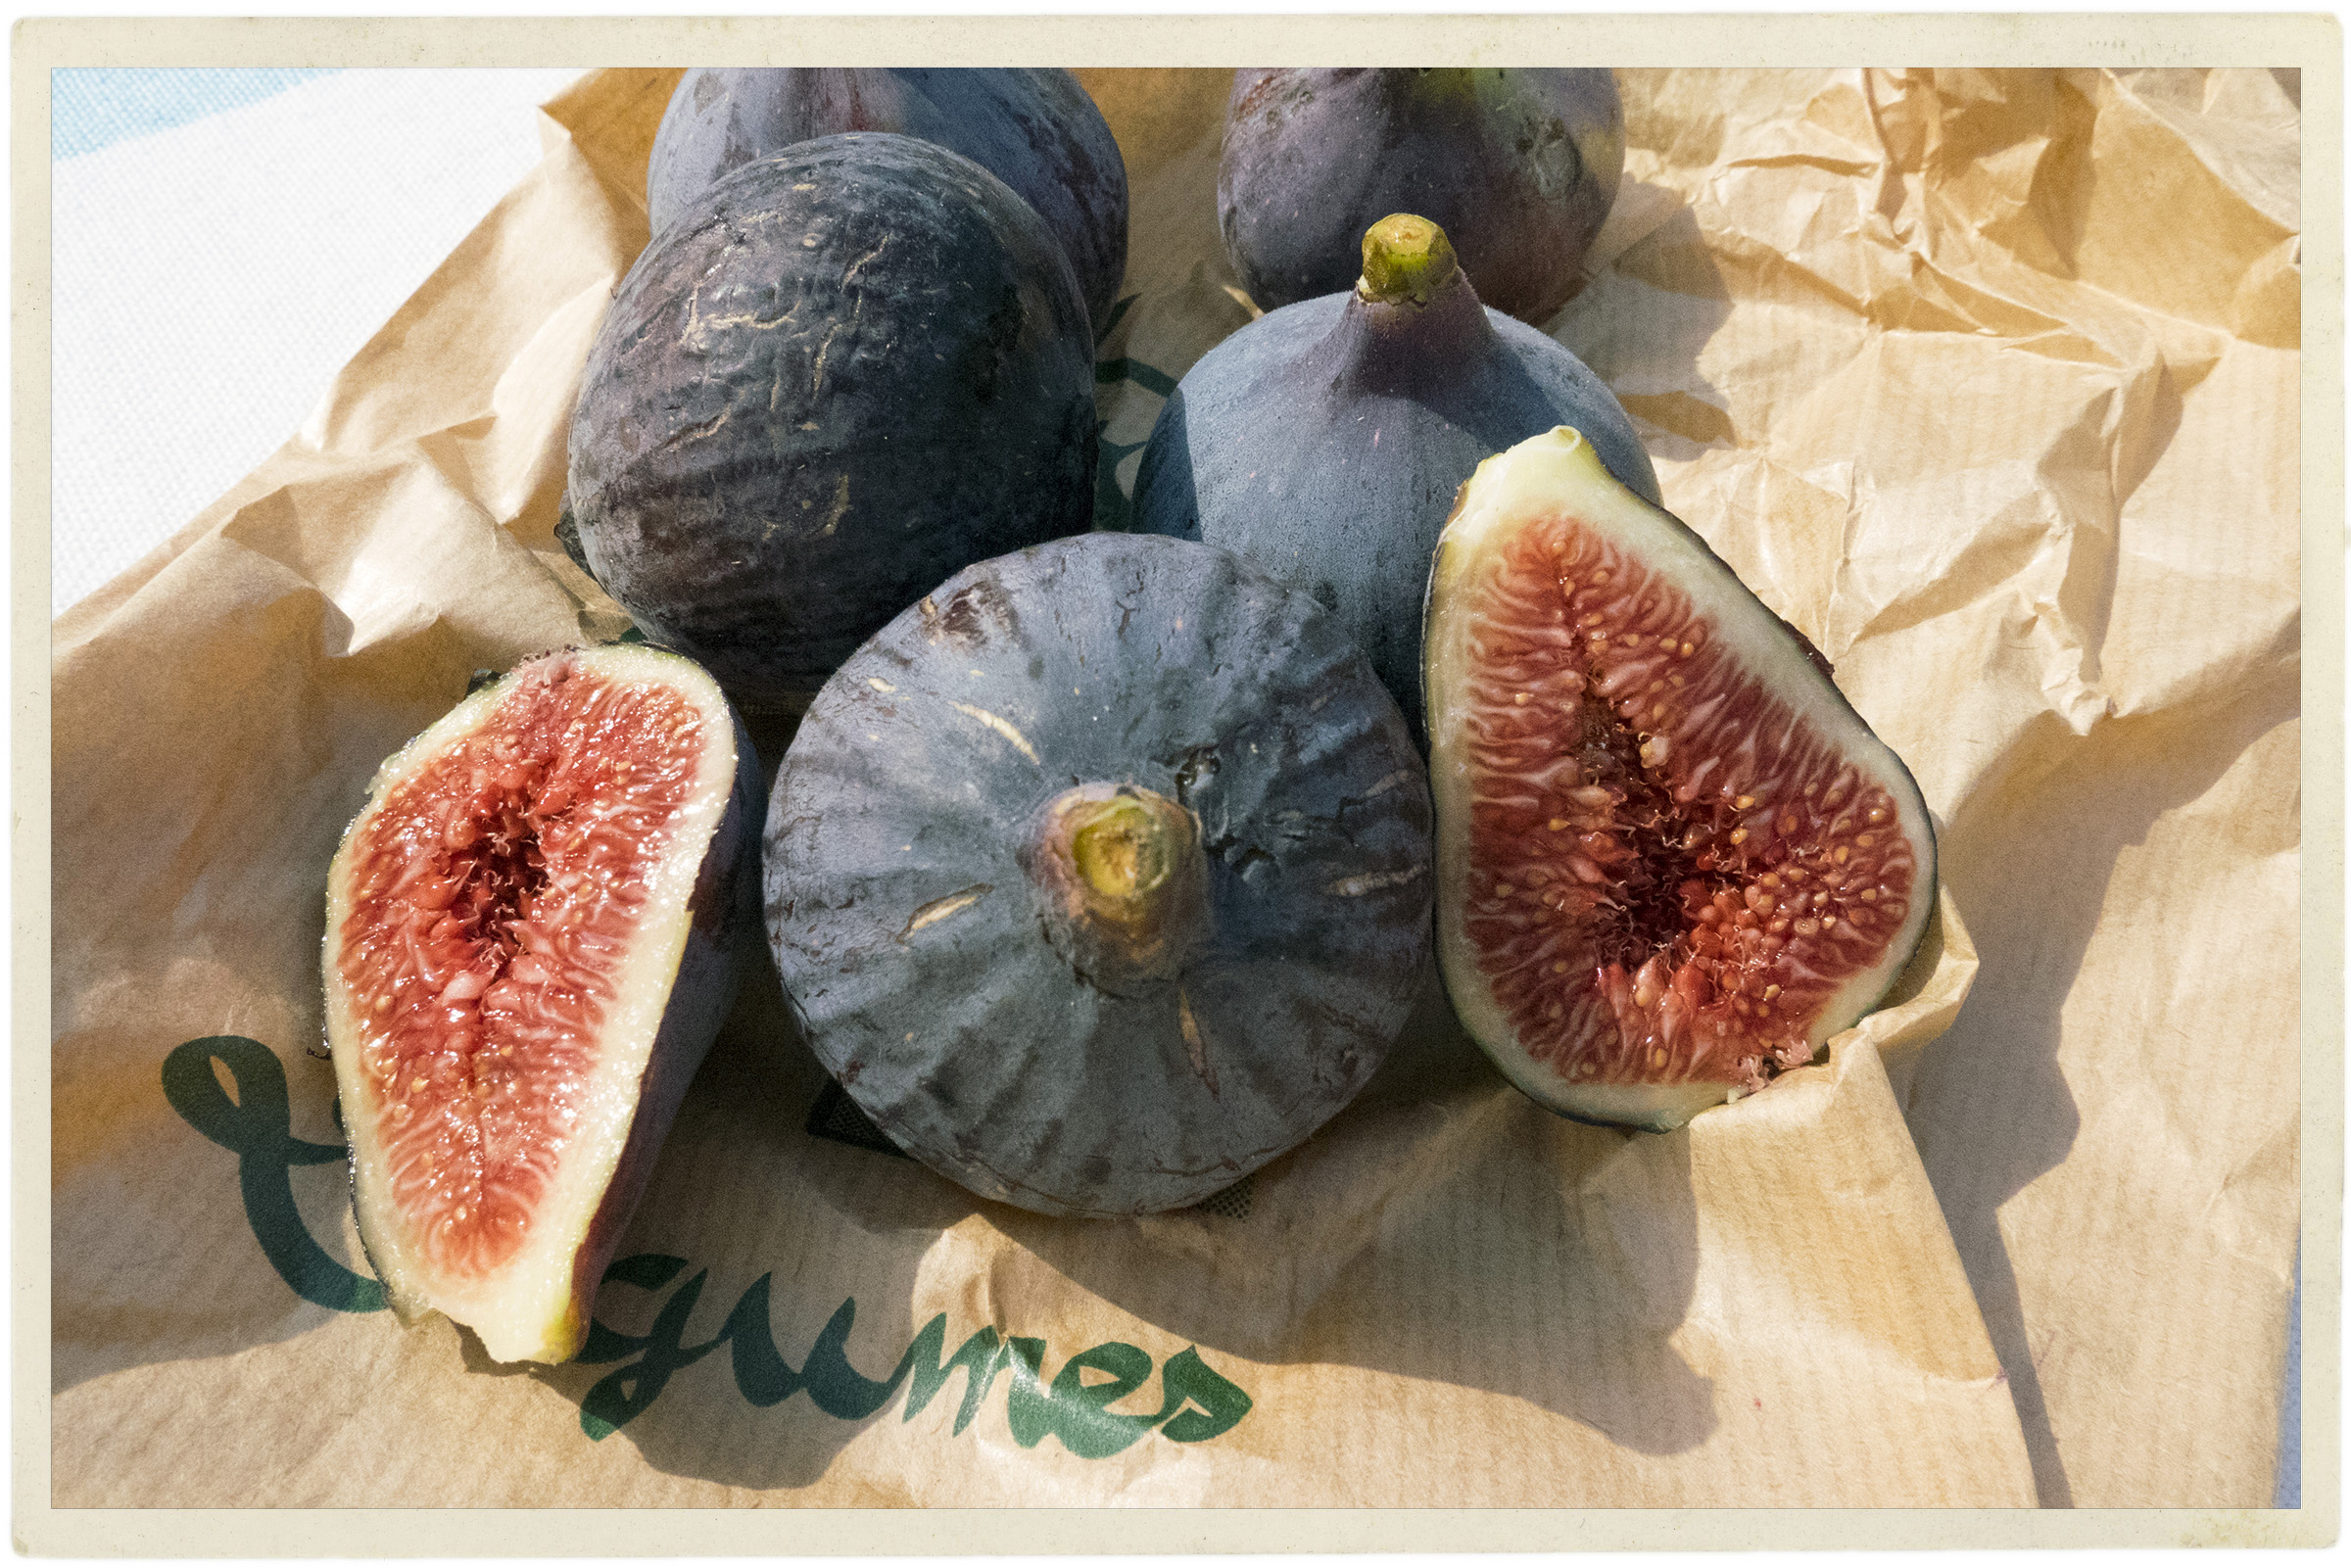 Glorious figs.